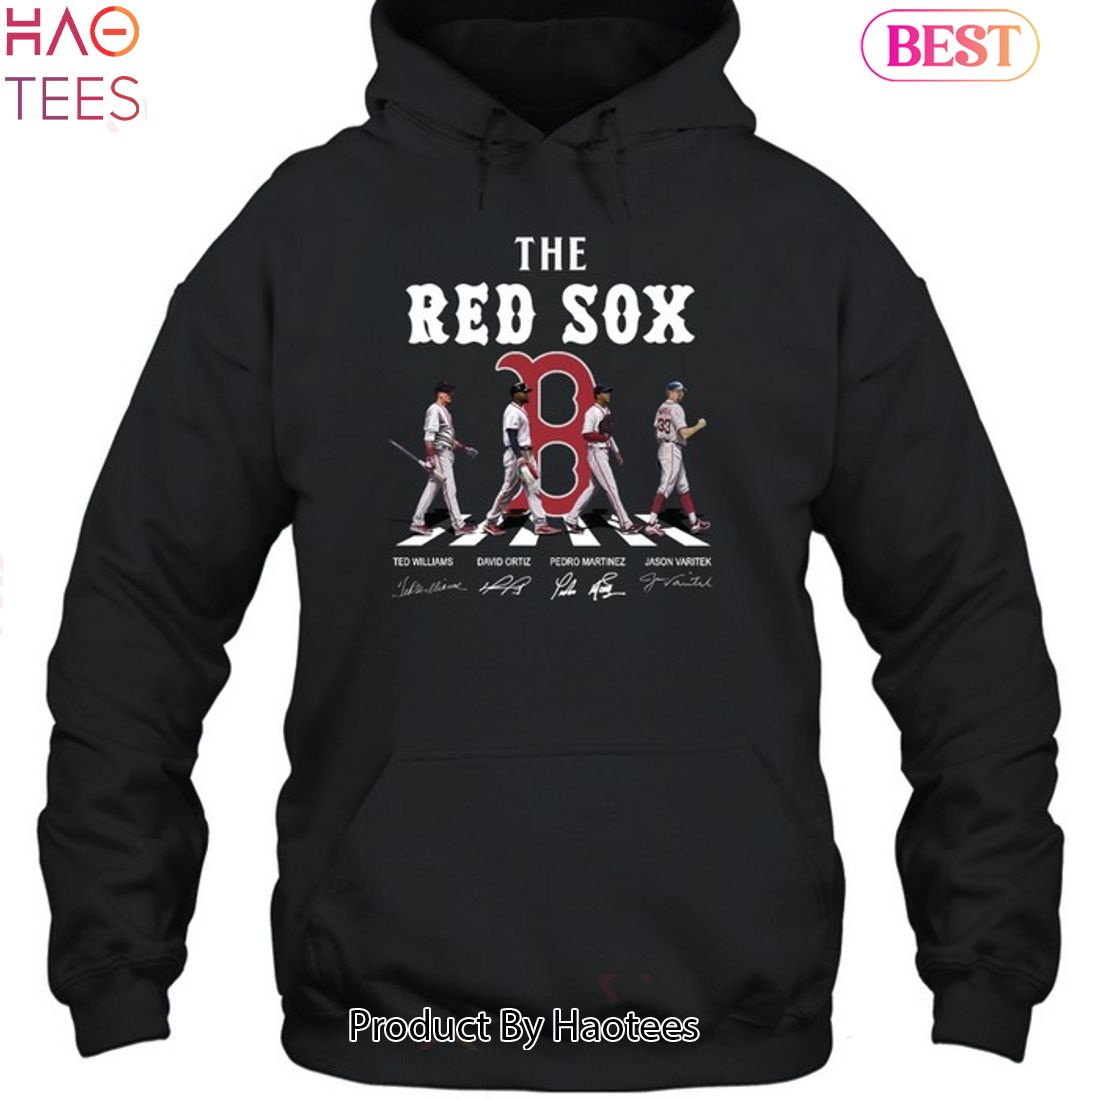 The Boston Red Sox Legend Unisex T-Shirt Limited Edition